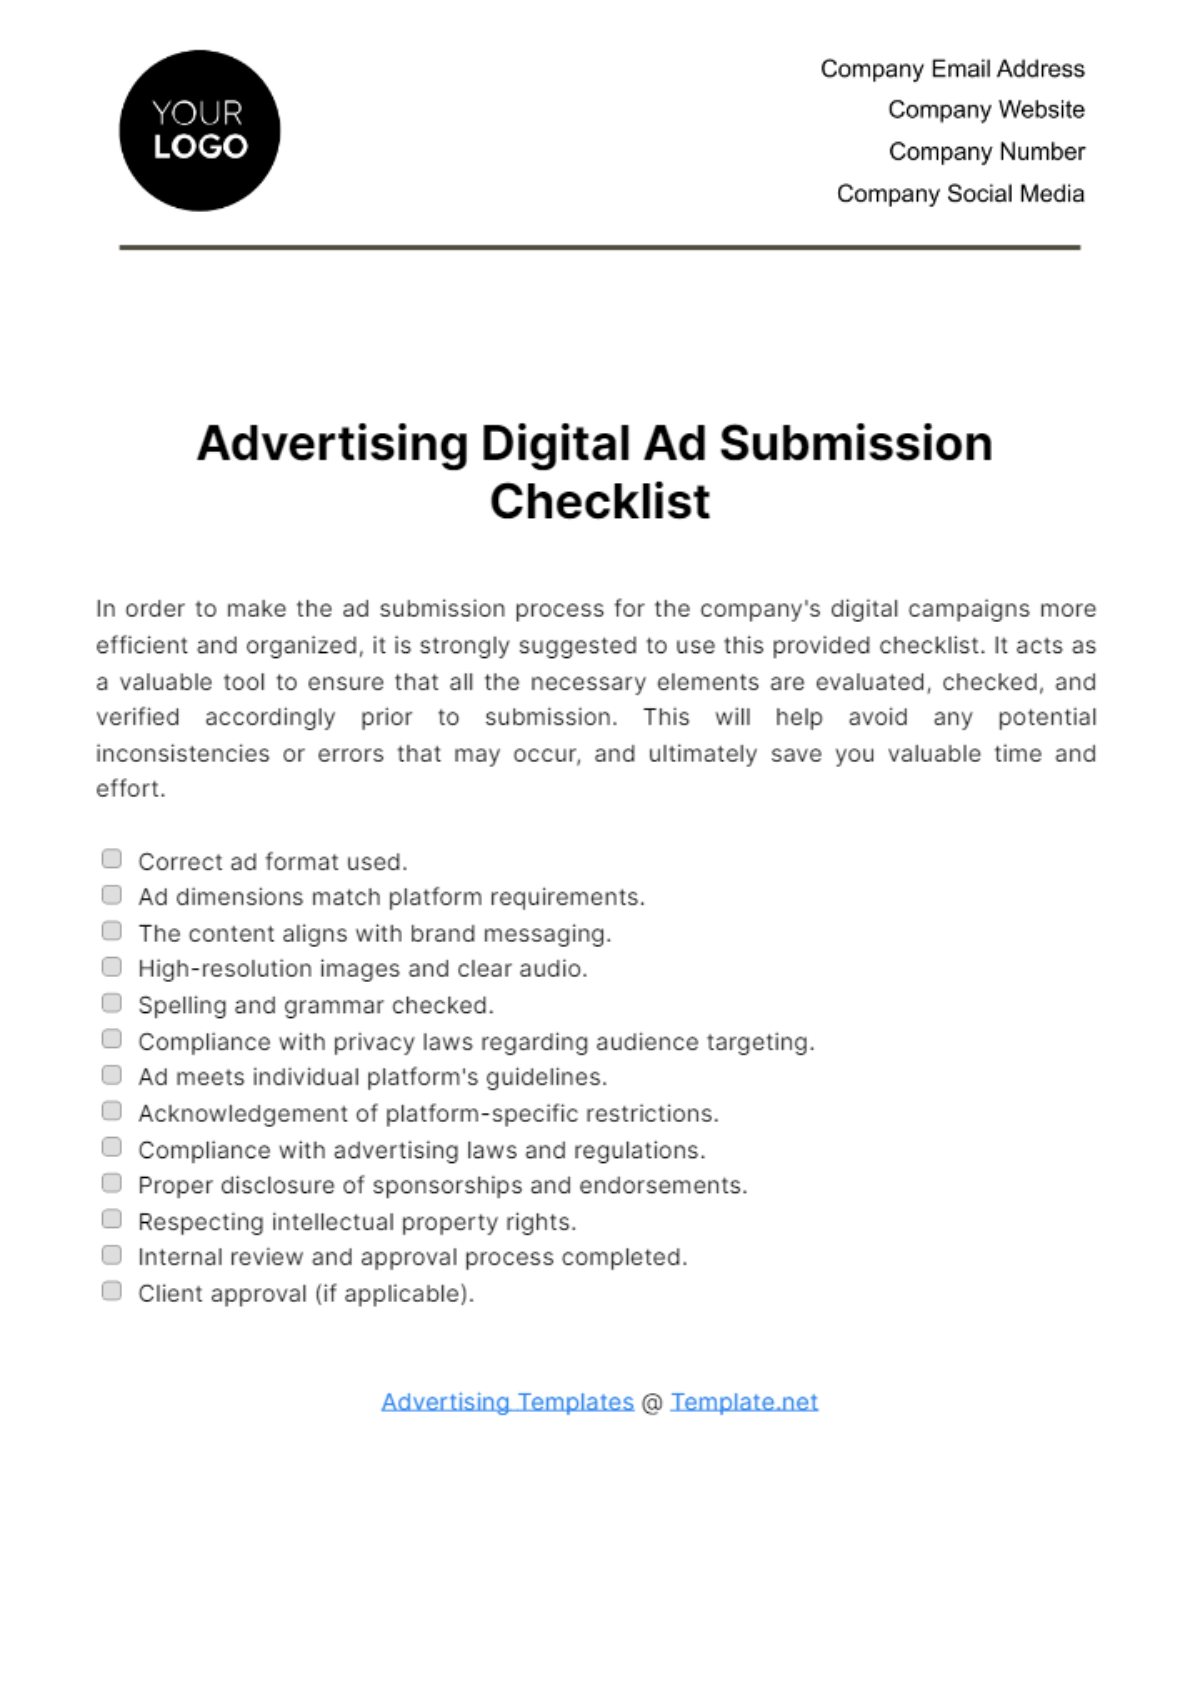 Free Advertising Digital Ad Submission Checklist Template